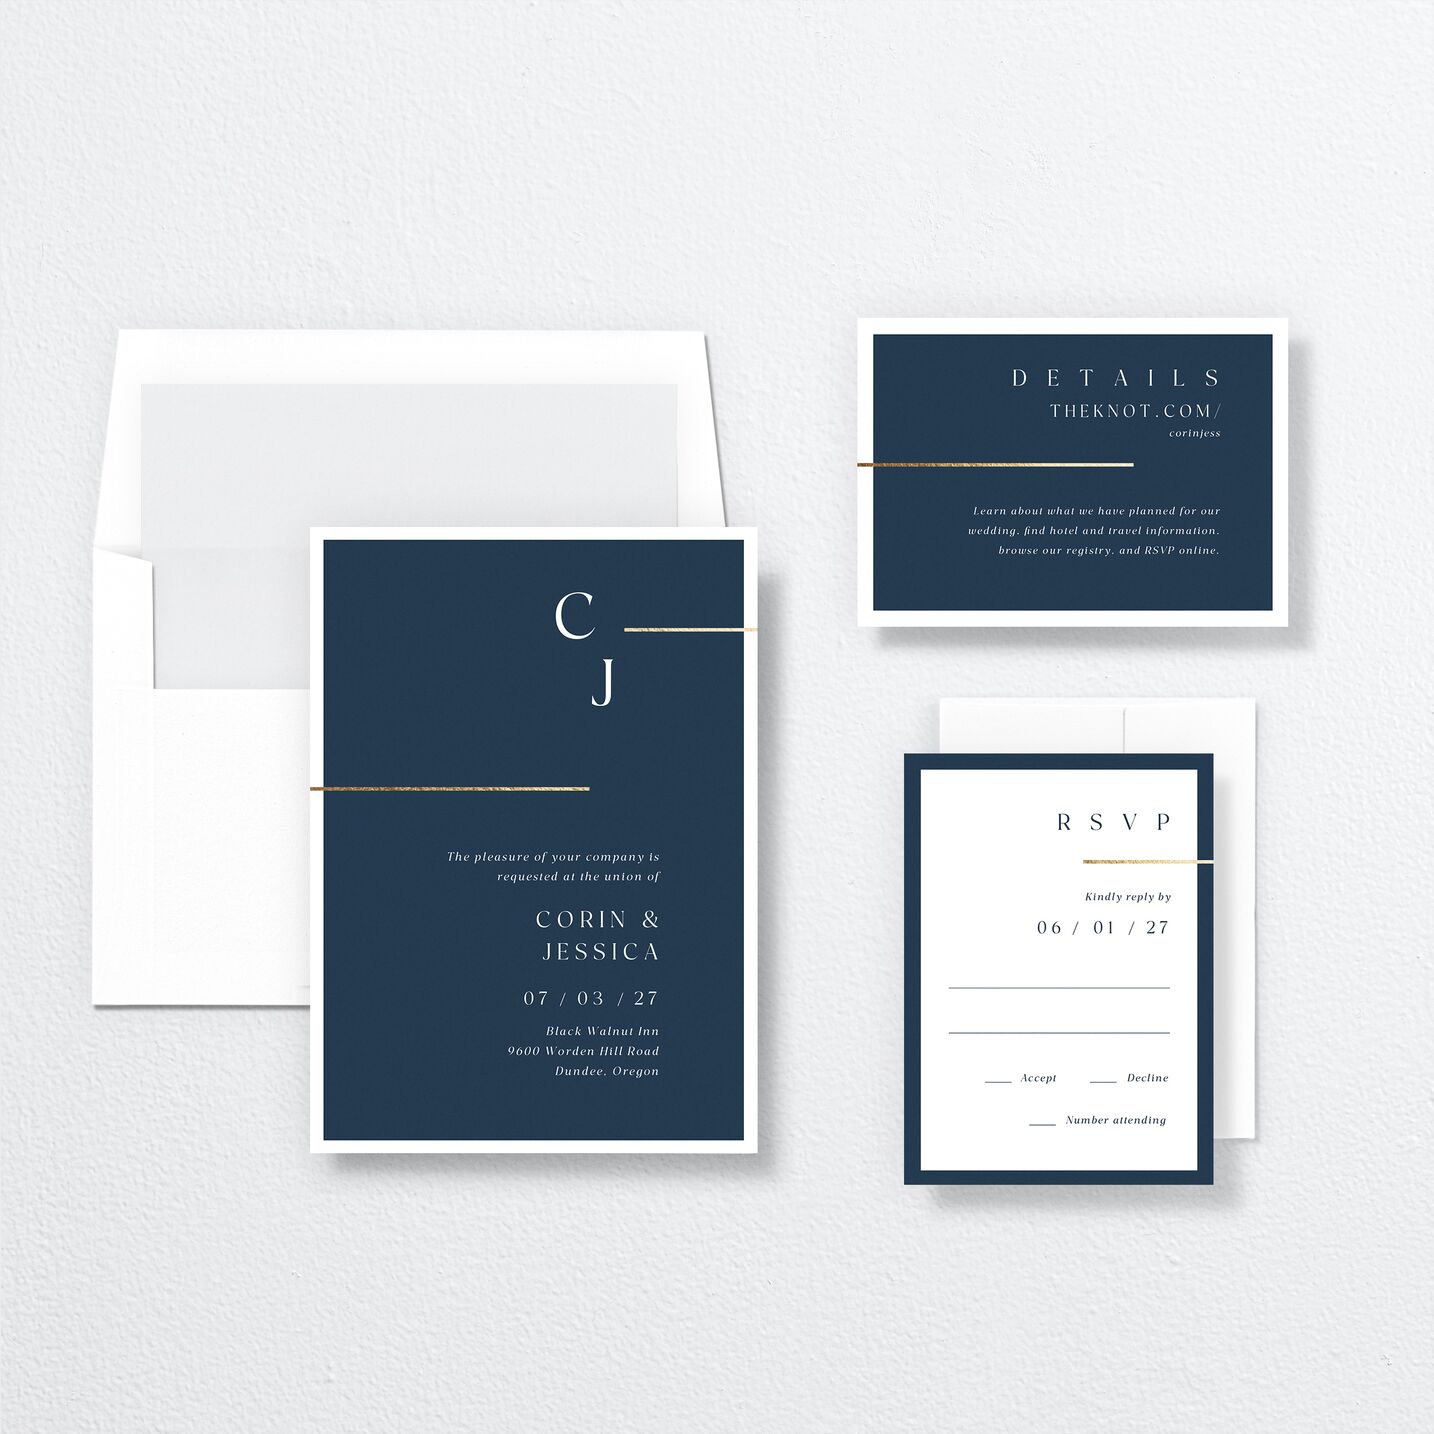 Refined Accent Wedding Invitations | The Knot